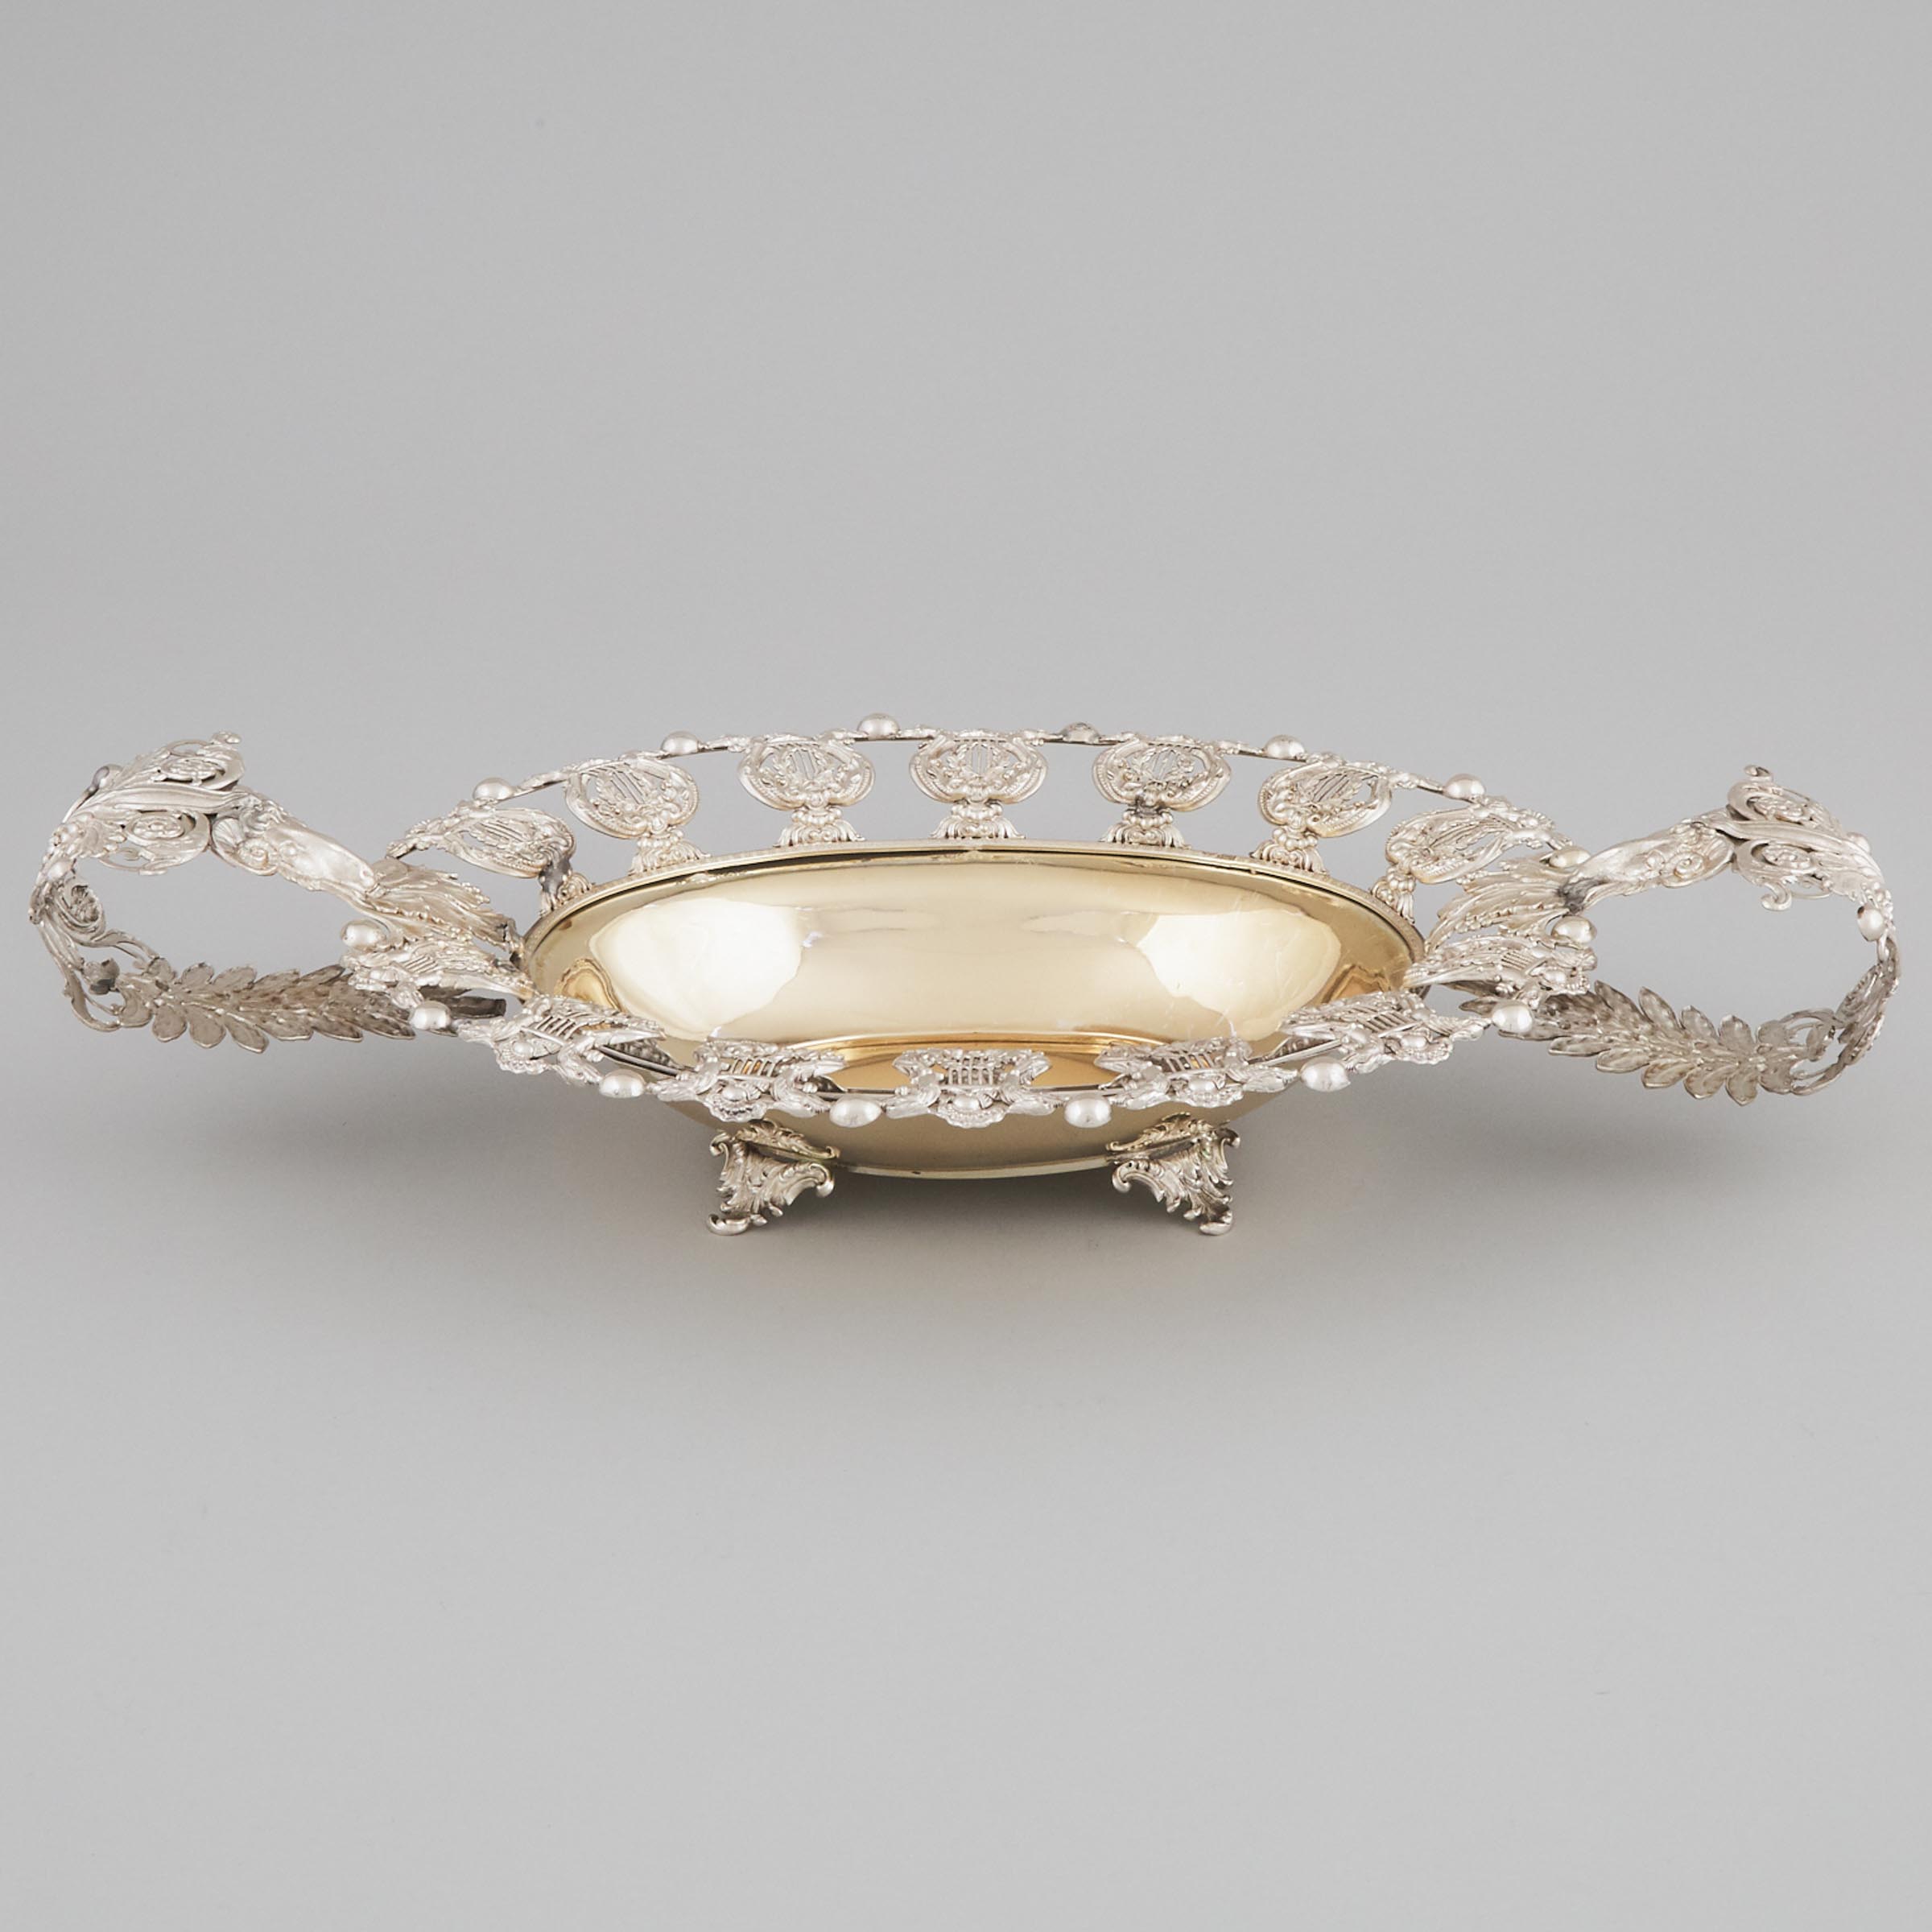 Austro-Hungarian Silver Parcel-Gilt Oval Two-Handled Basket, Vienna, 1839